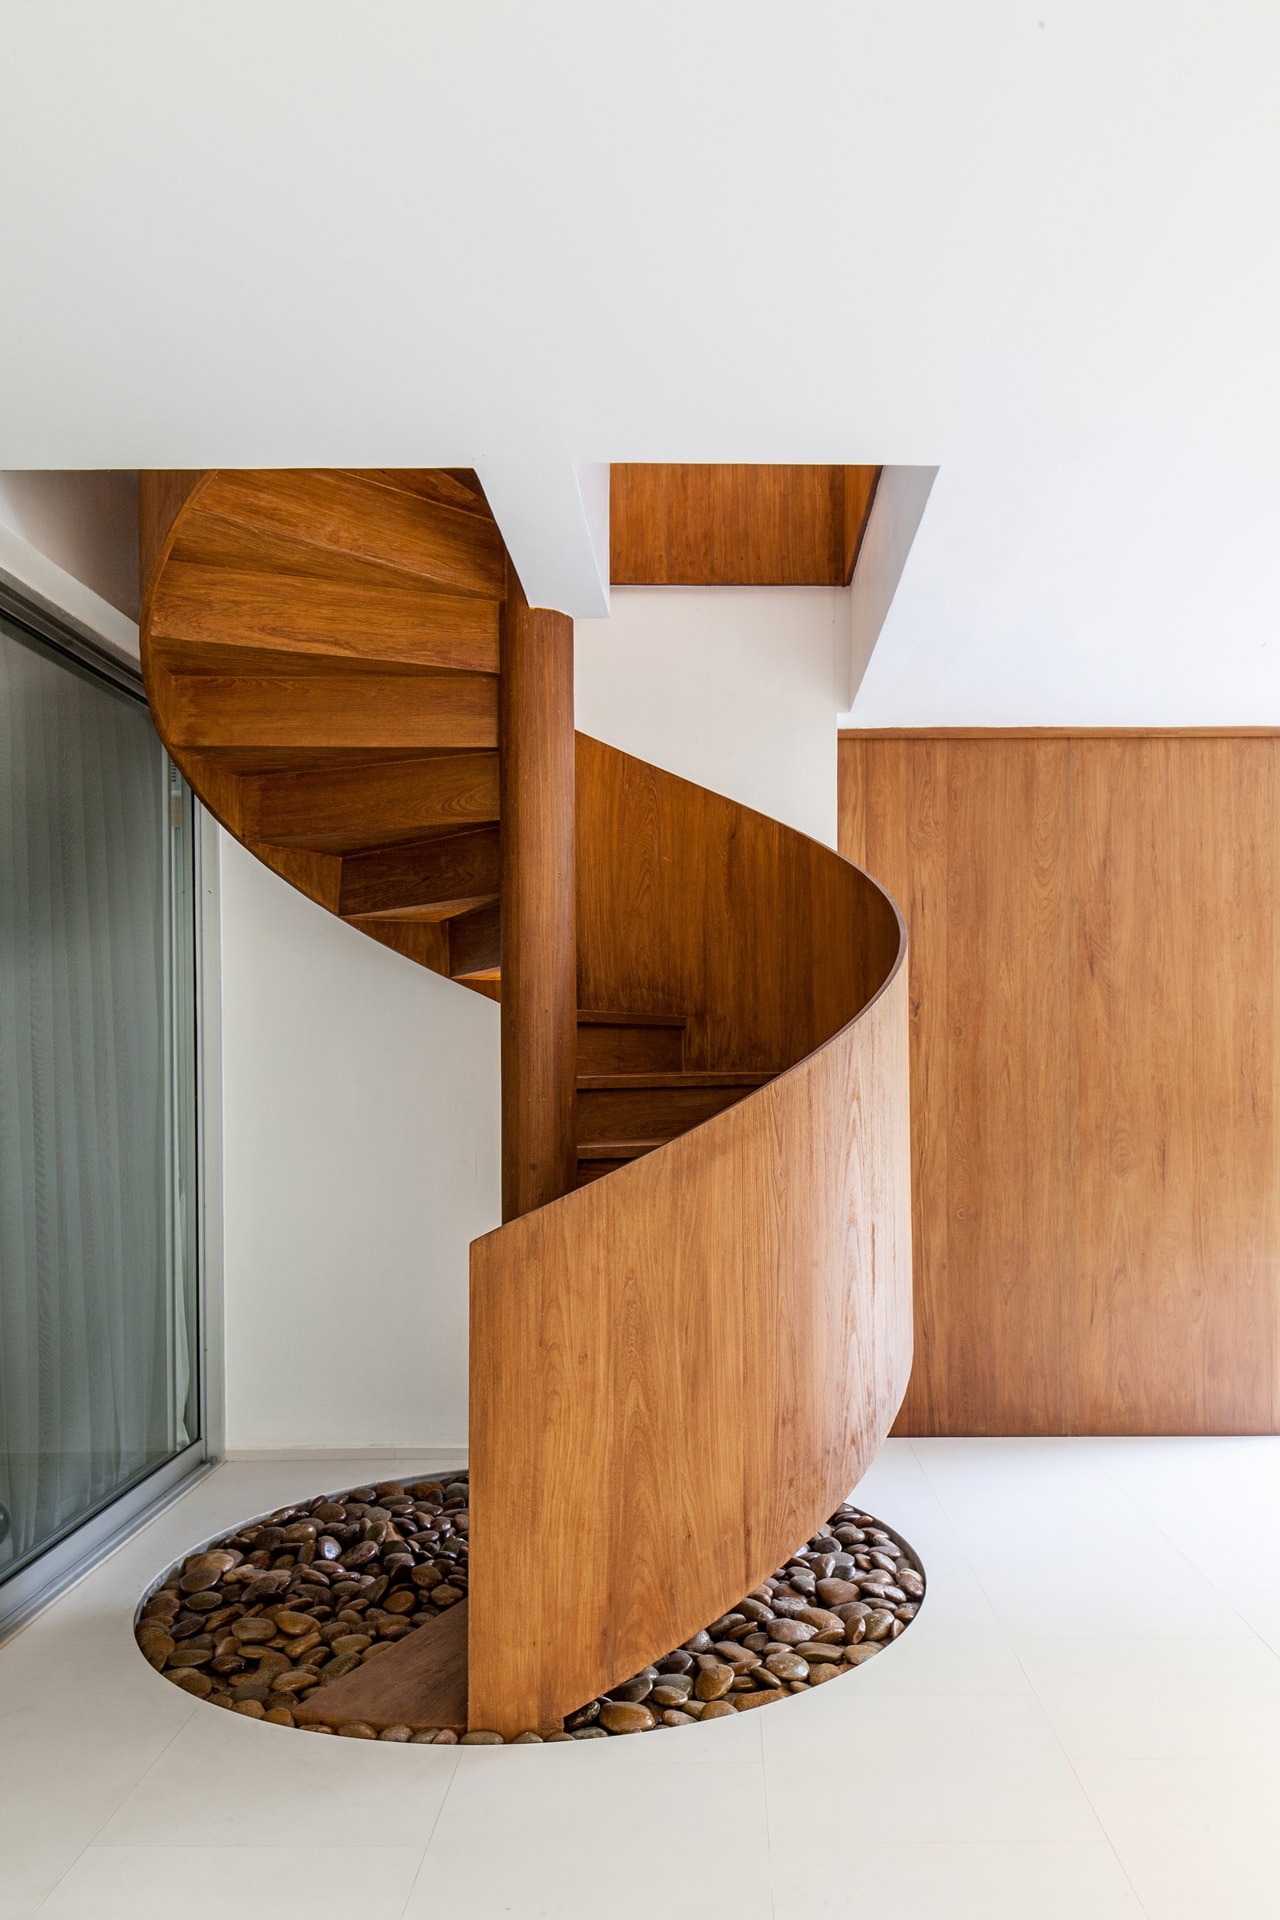 Wooden spiral staircase designed by Hypothesis Design Agency